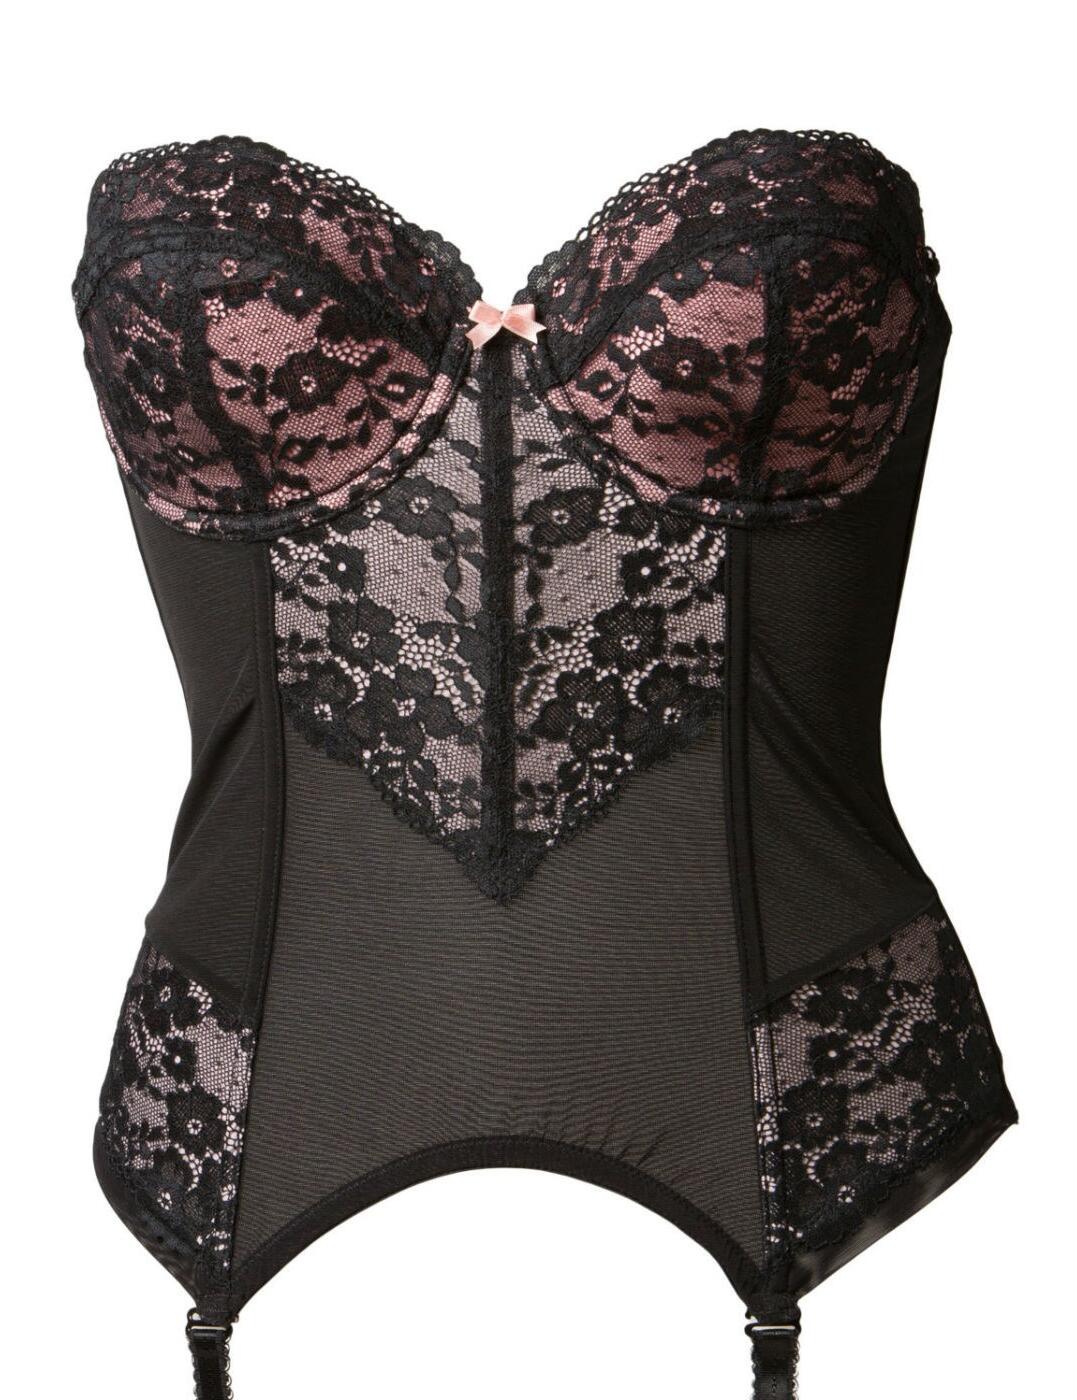 9505 Pour Moi? Love Lace Lightly Padded Basque  - 9505 Black/Pink